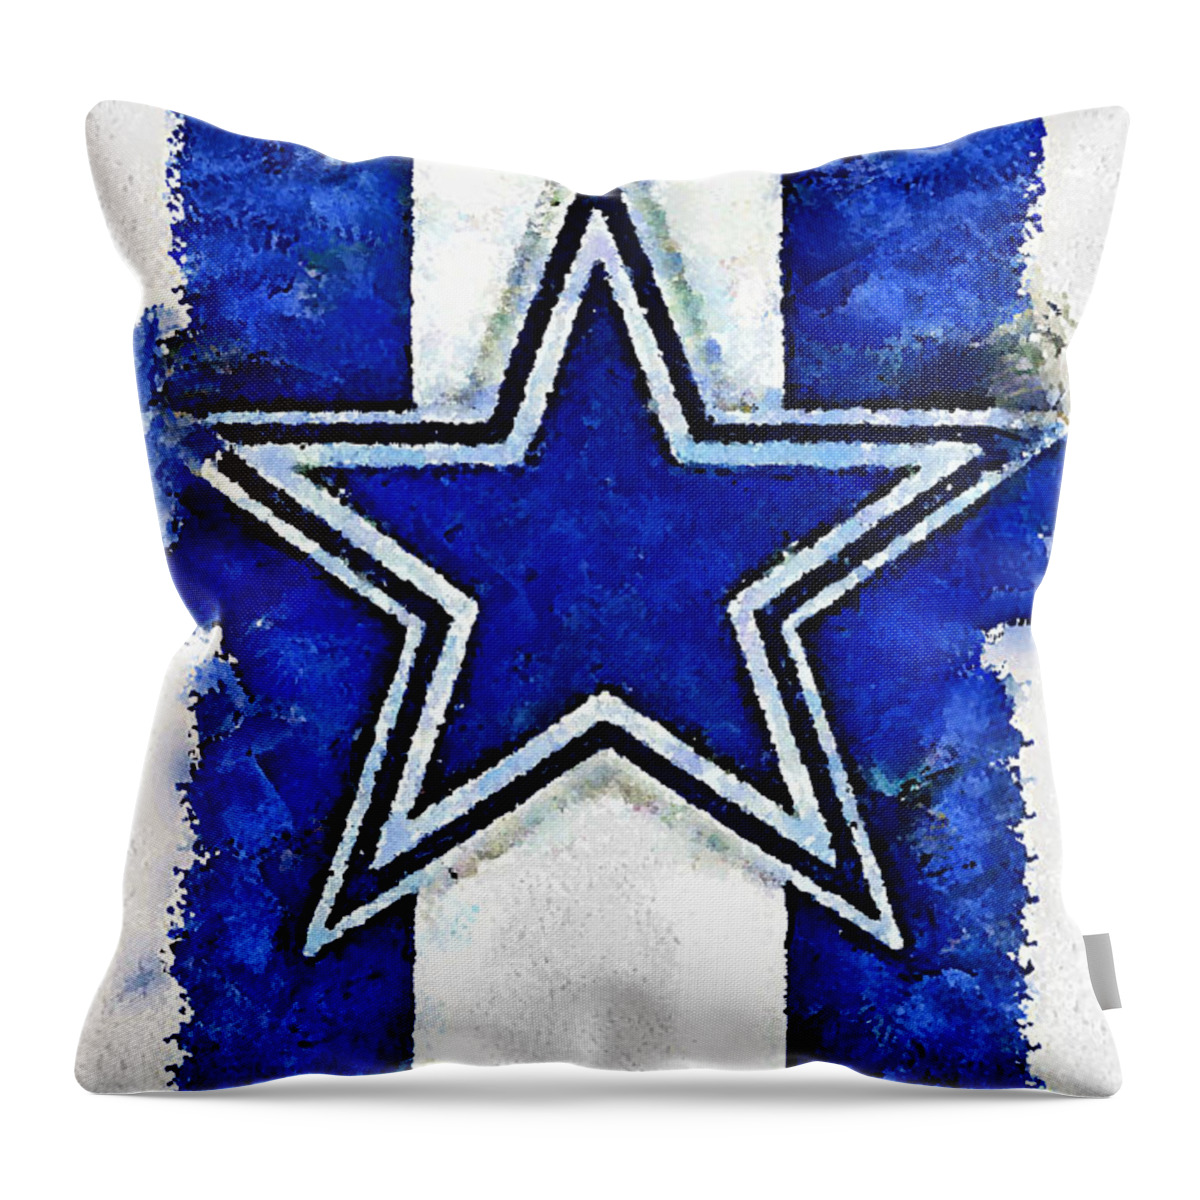 Dallas Cowboys Throw Pillow featuring the digital art Cowbys Iphone case by Carrie OBrien Sibley